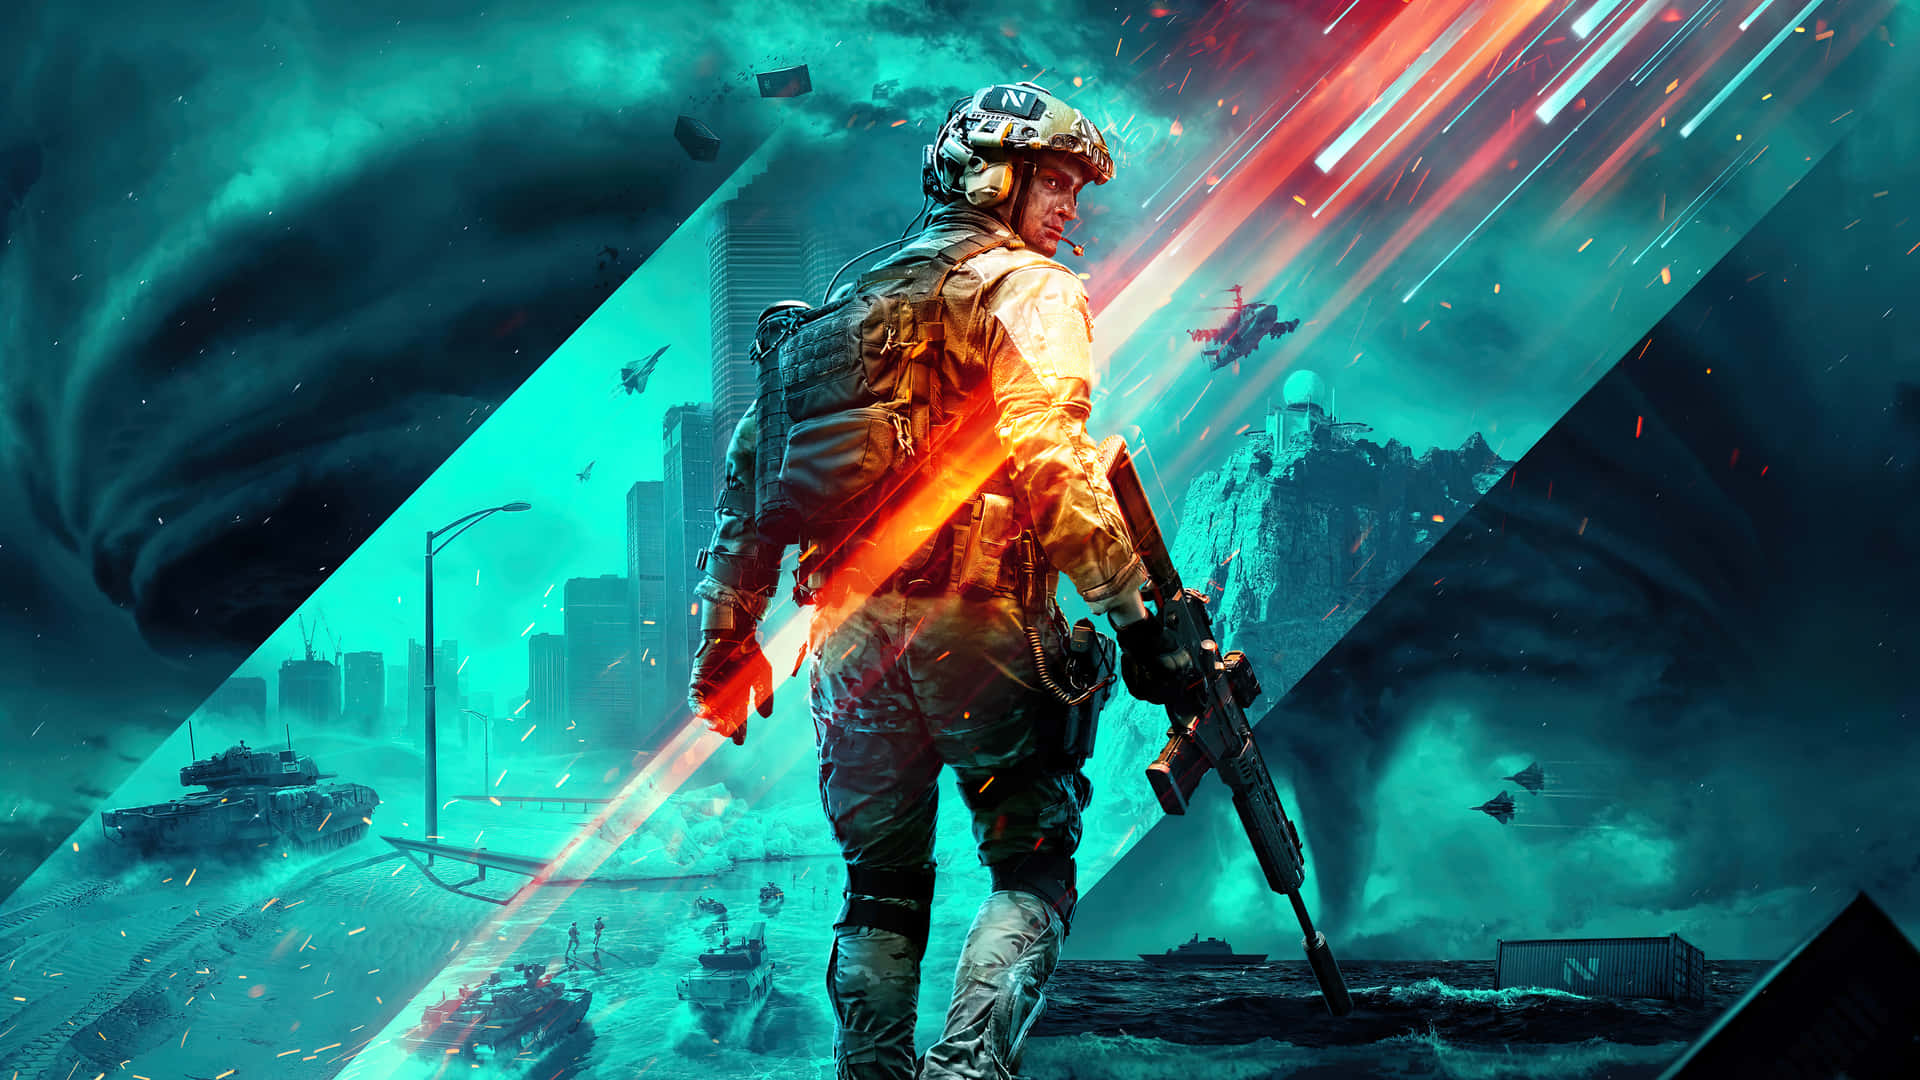 Intense FPS gaming action in a futuristic world Wallpaper